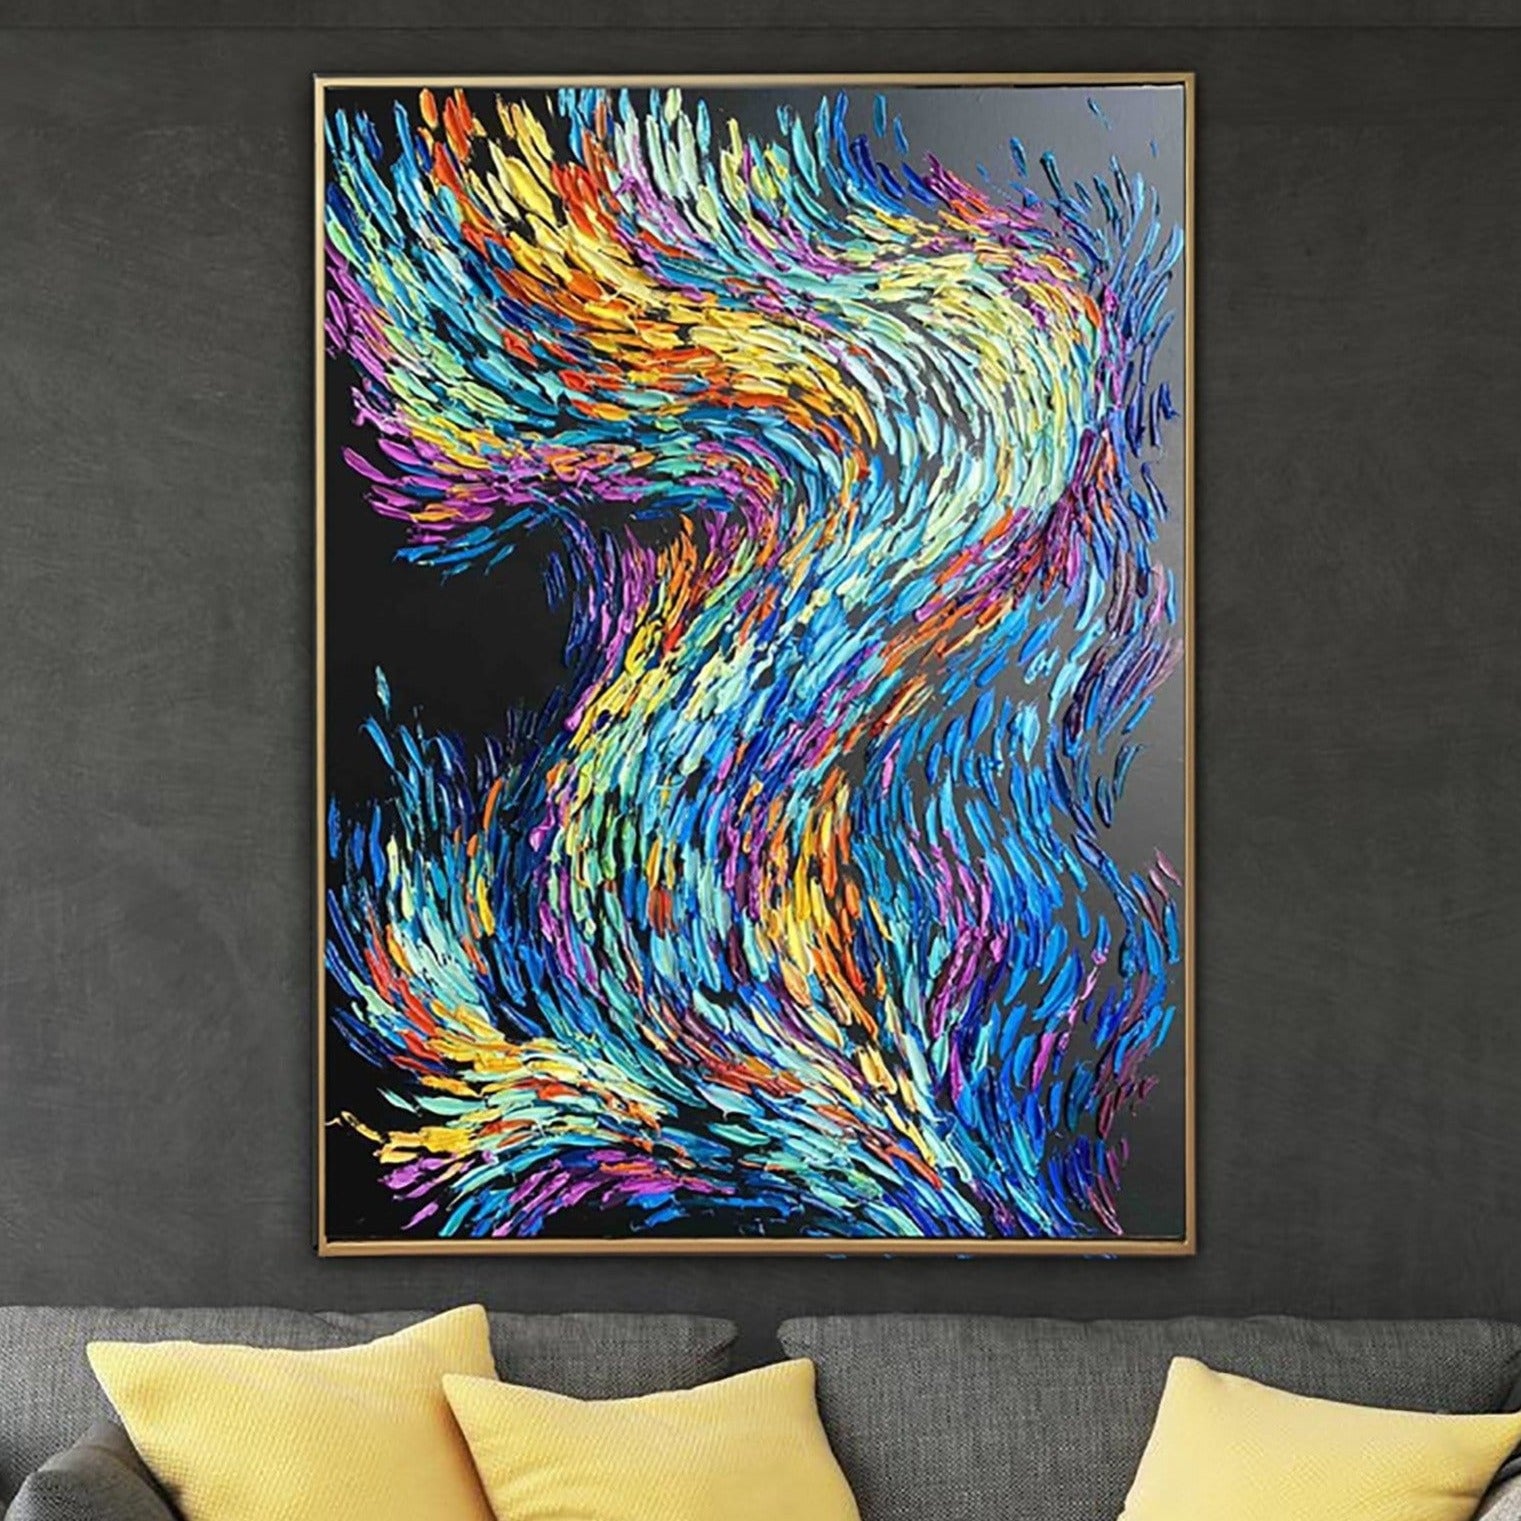 Bright Colorful Oil Painting on Canvas. Hand Painted Abstract 